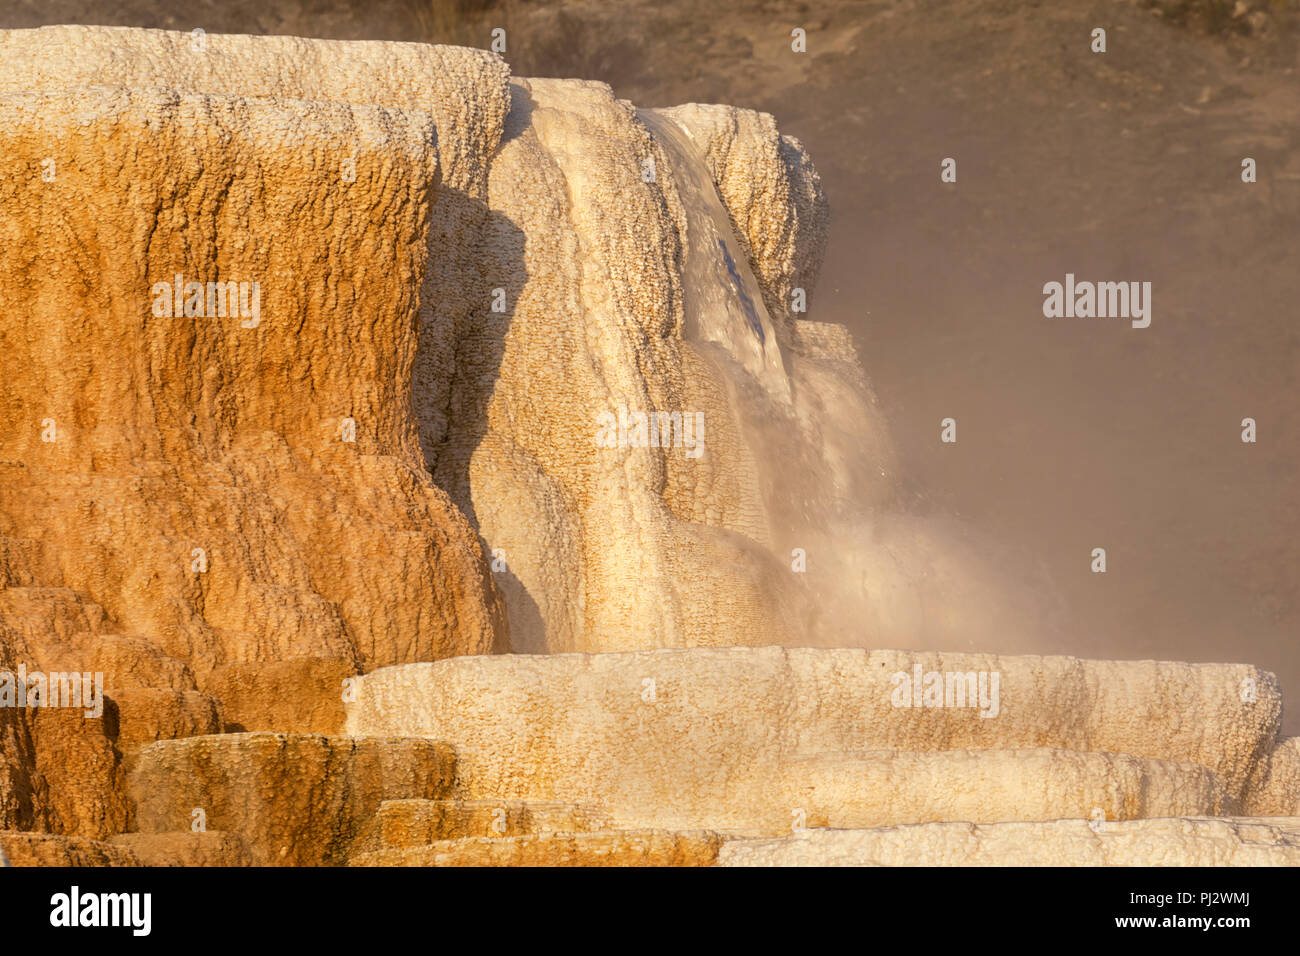 Yellowstone Mammoth Hot Springs Banque D'Images